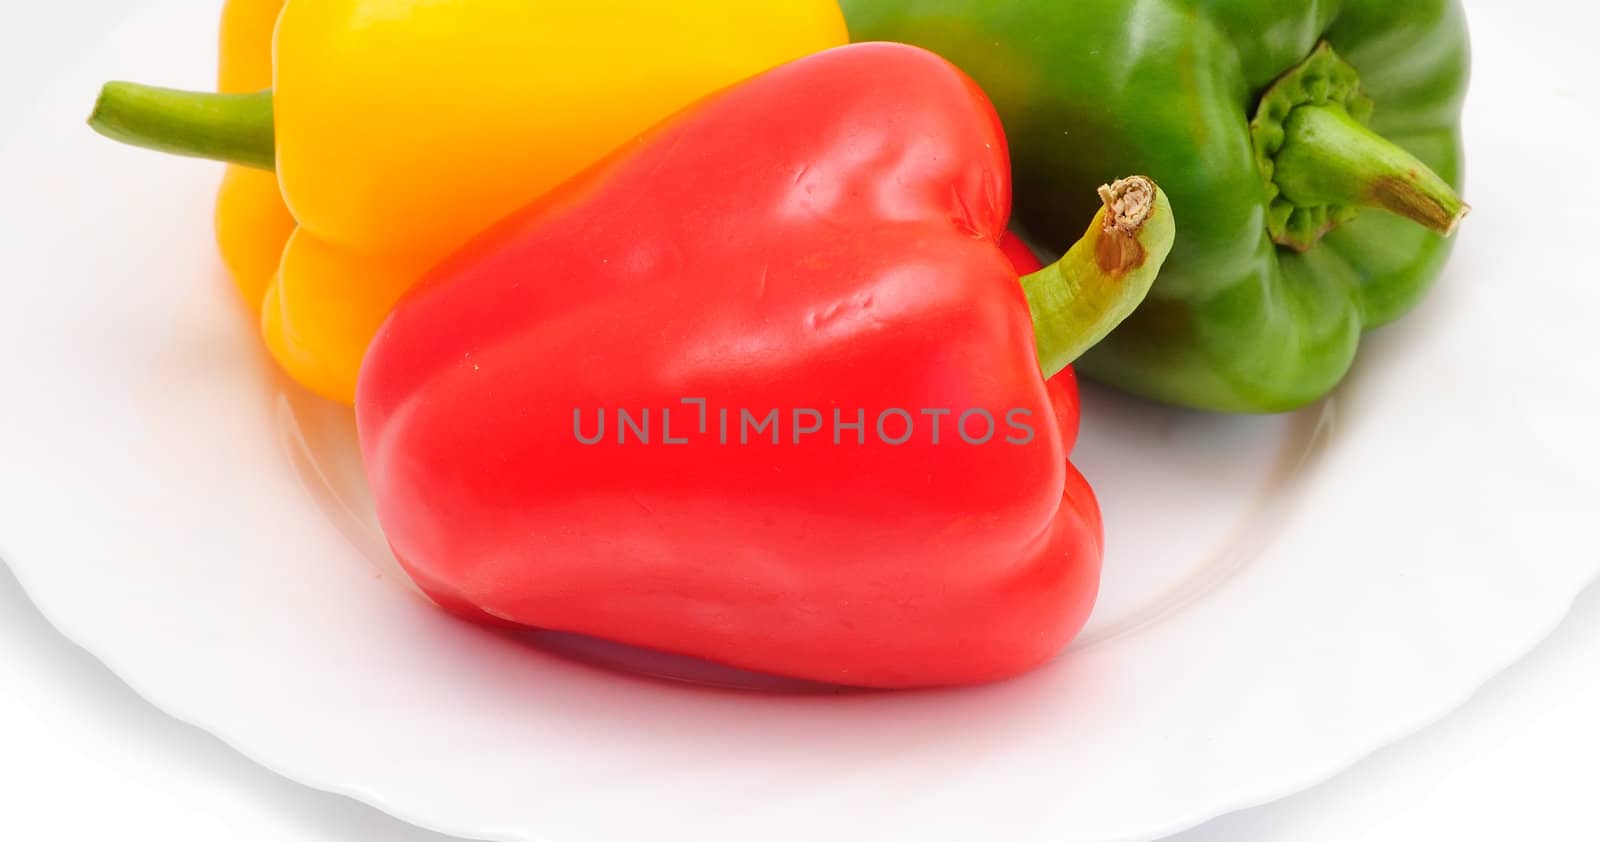 three sweet peppers (paprika) on plate